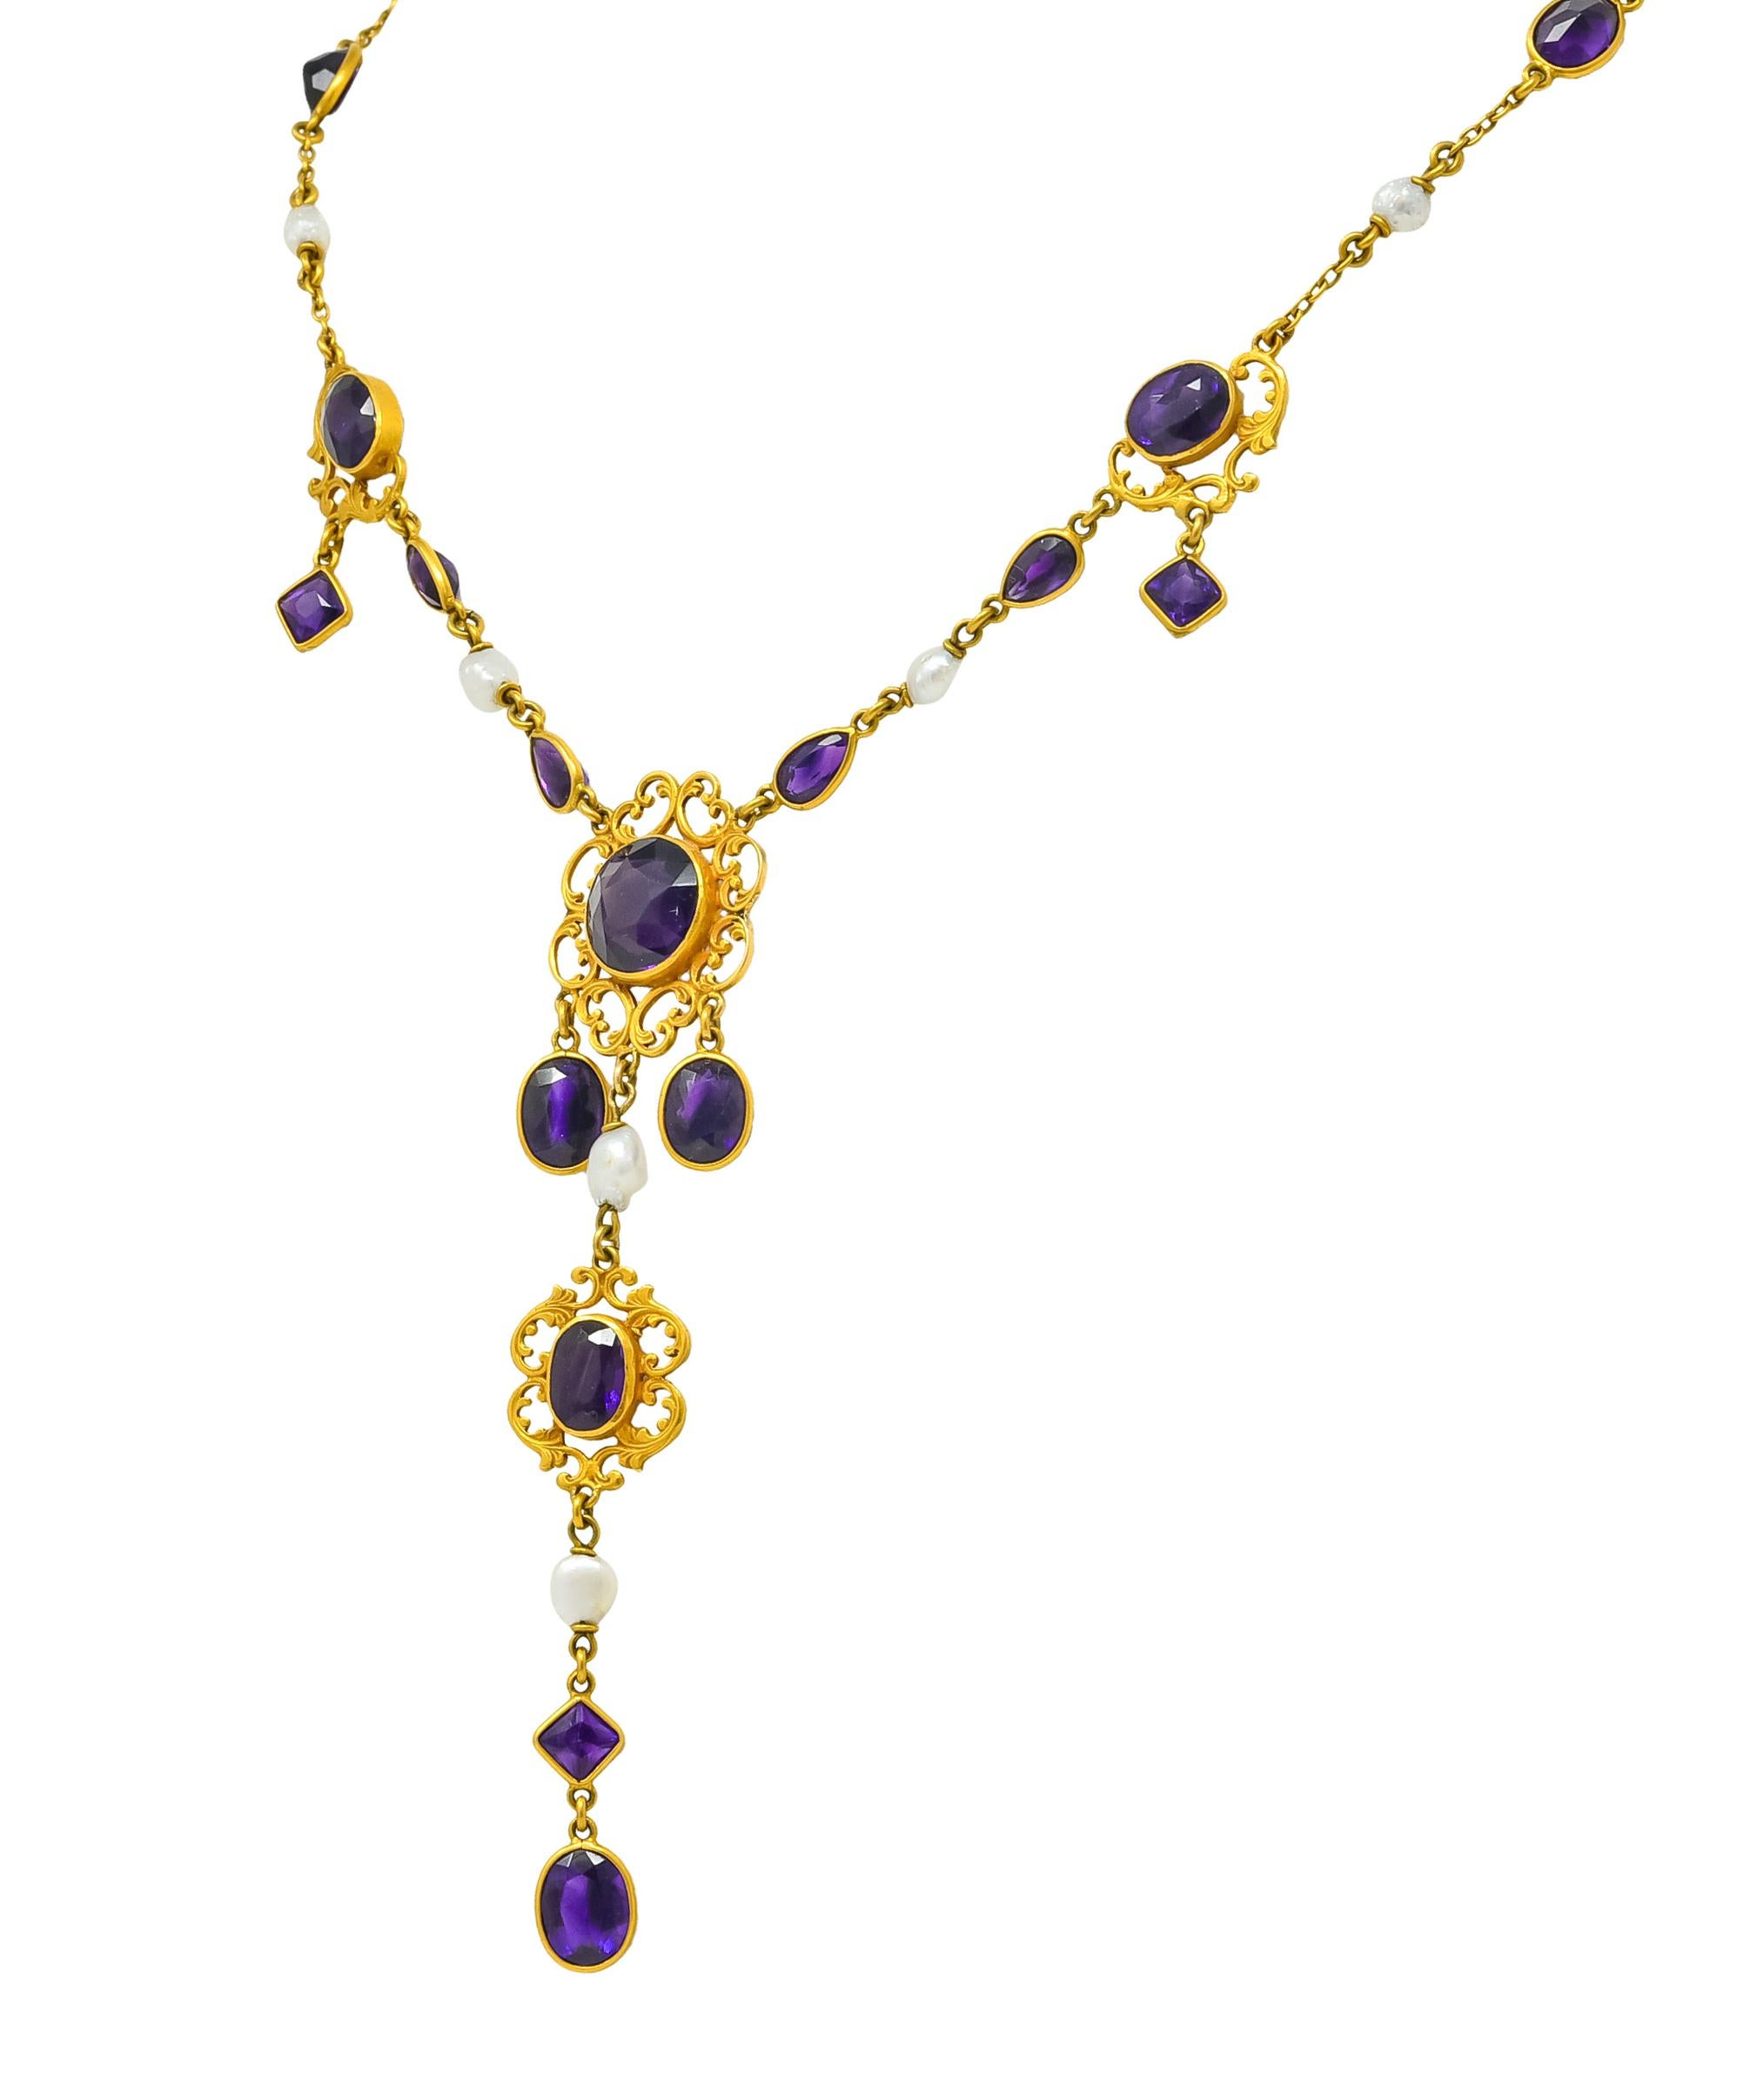 Necklace designed with four scrolled whiplash stations featuring small articulated drops and one very long dramatic drop

Set throughout by bezel set amethyst varying in size and shape, all are very well matched and medium-dark purple

Accented